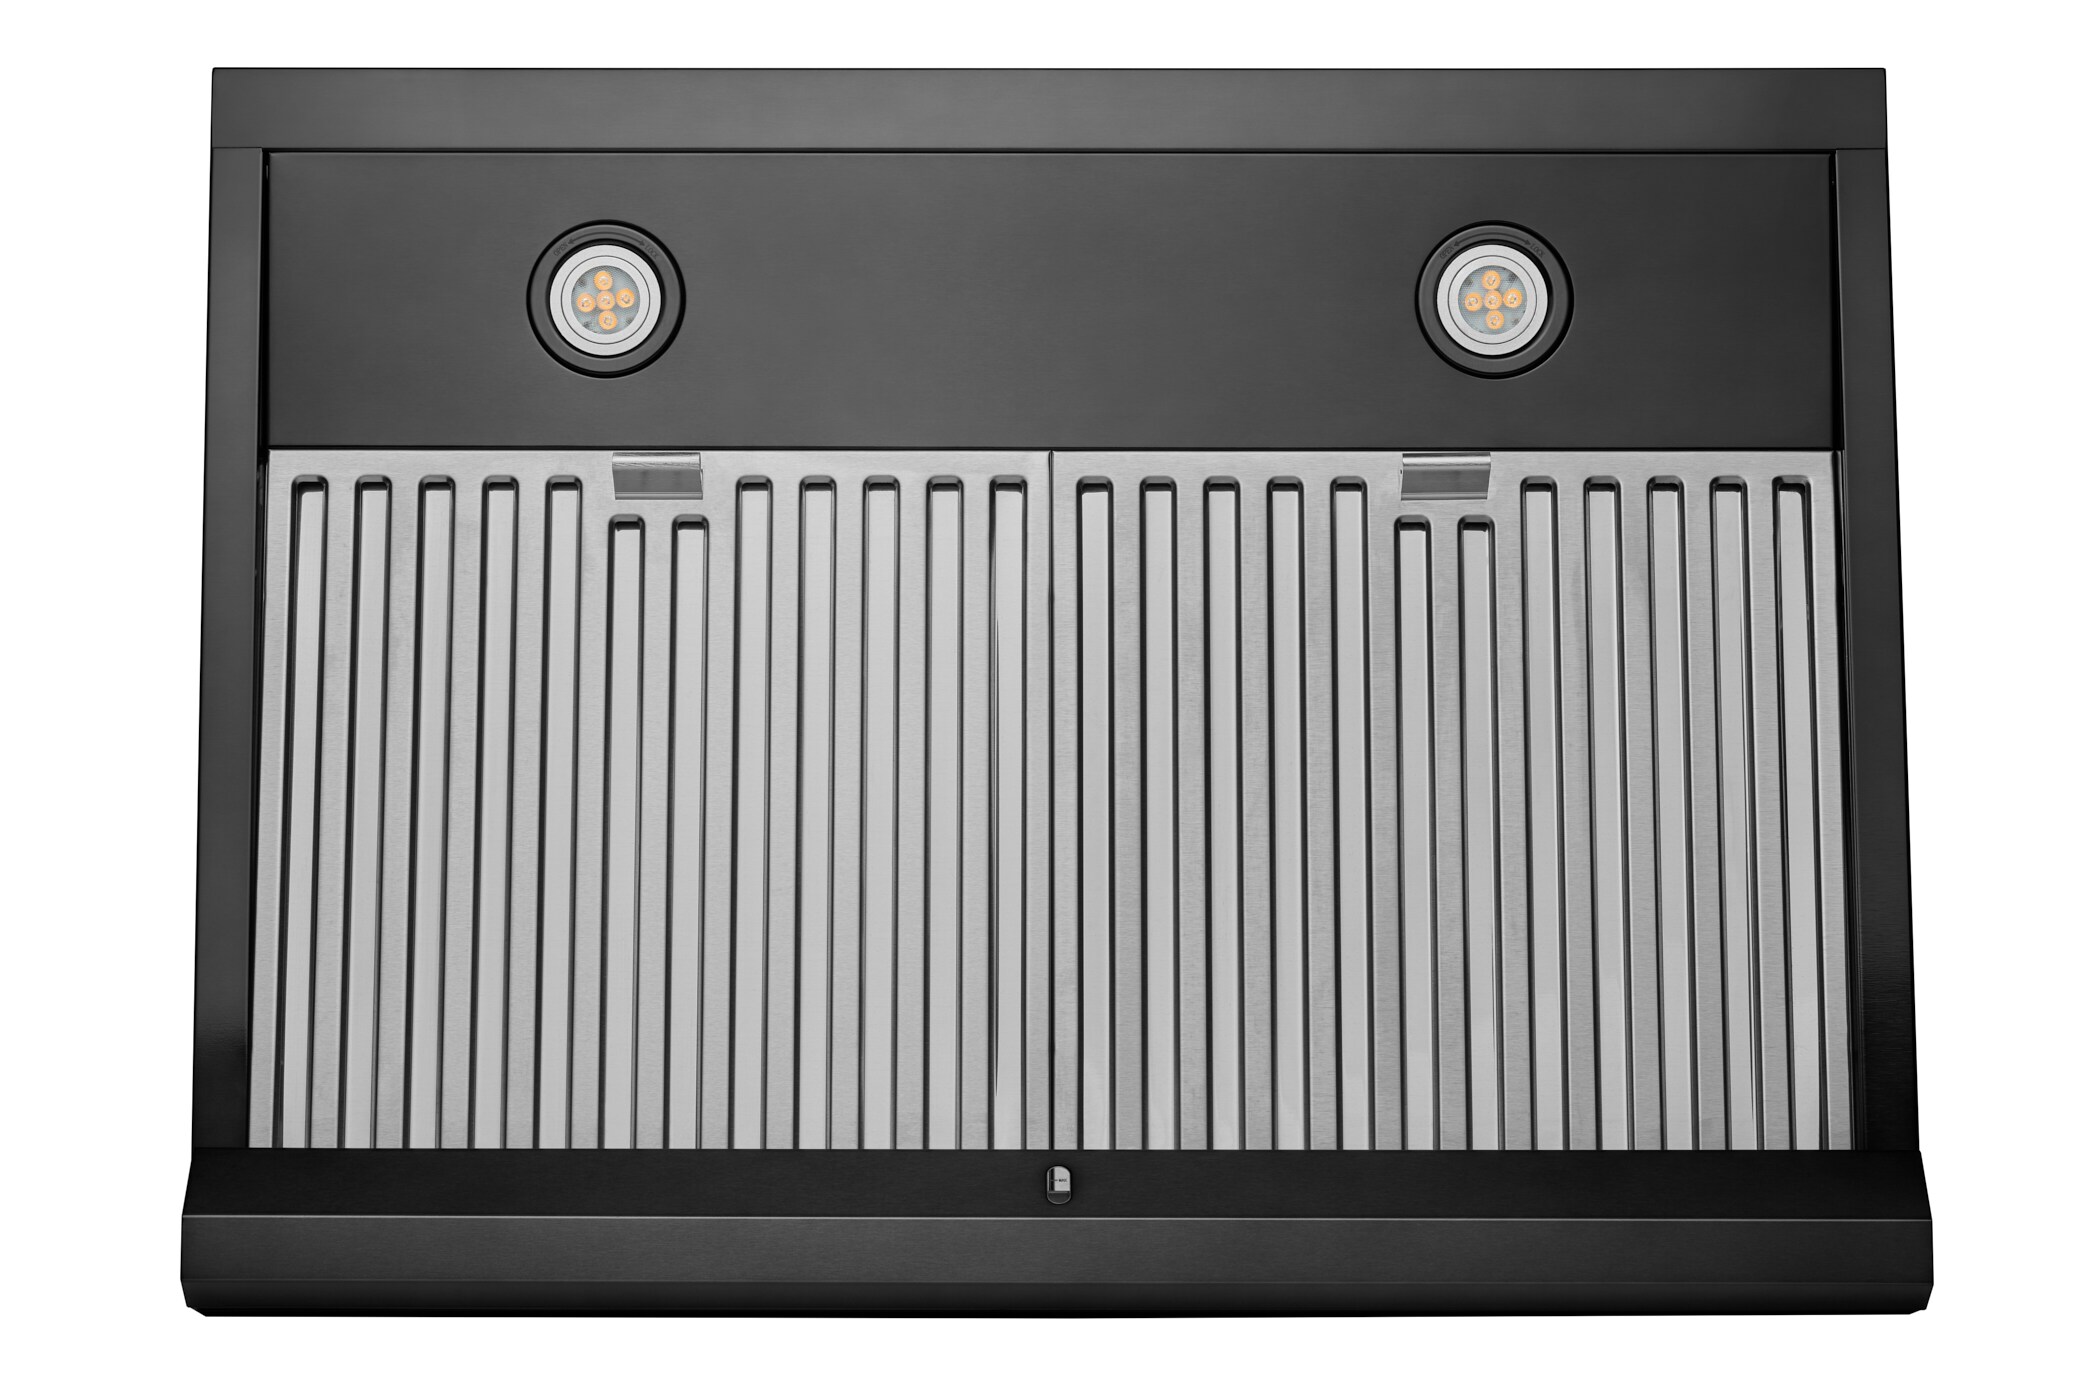 Vent-A-Hood SLH9-136 300 CFM 36 Under Cabinet Range Hood with A Single Blower A Black